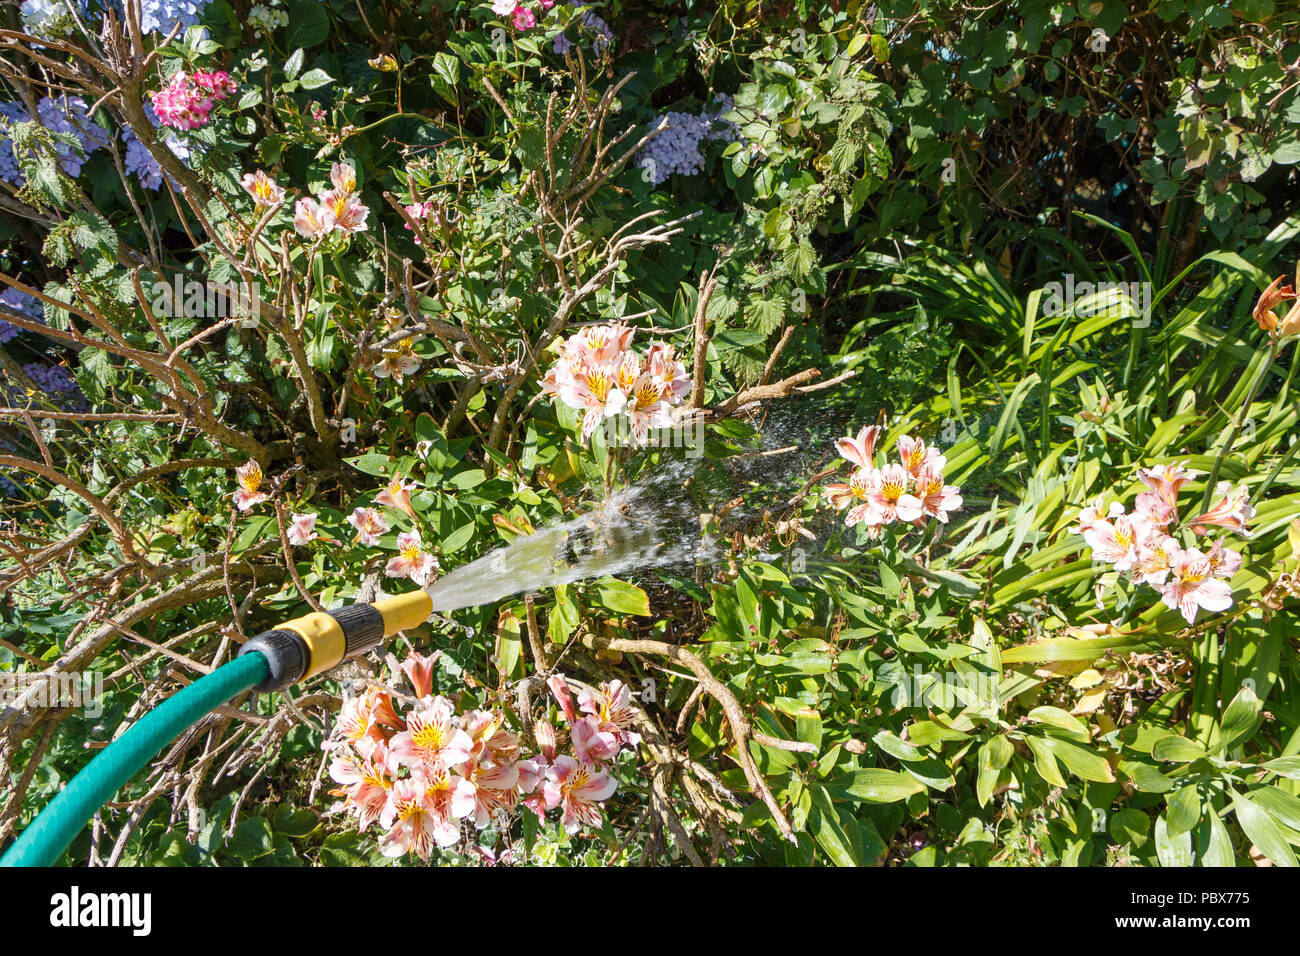 Watering plants in a garden with a green garden hose during summer Stock Photo